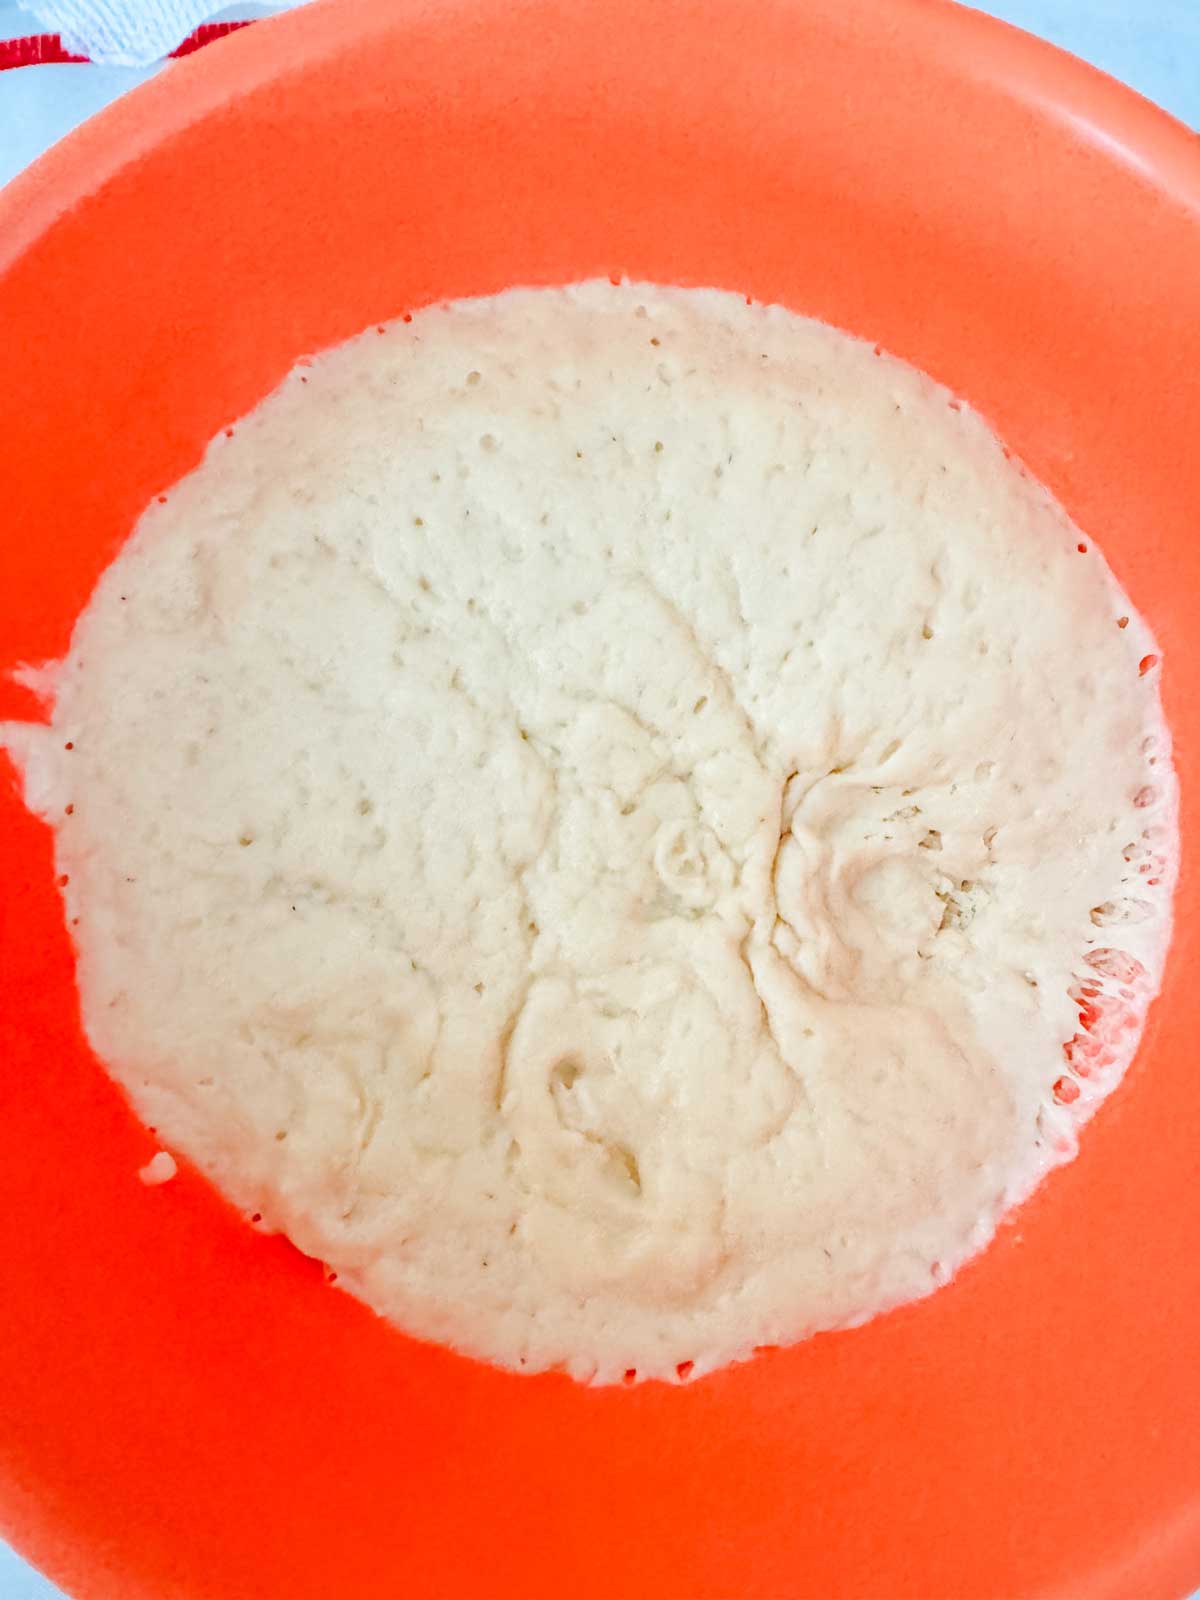 Brioche dough that has been refrigerated overnight.